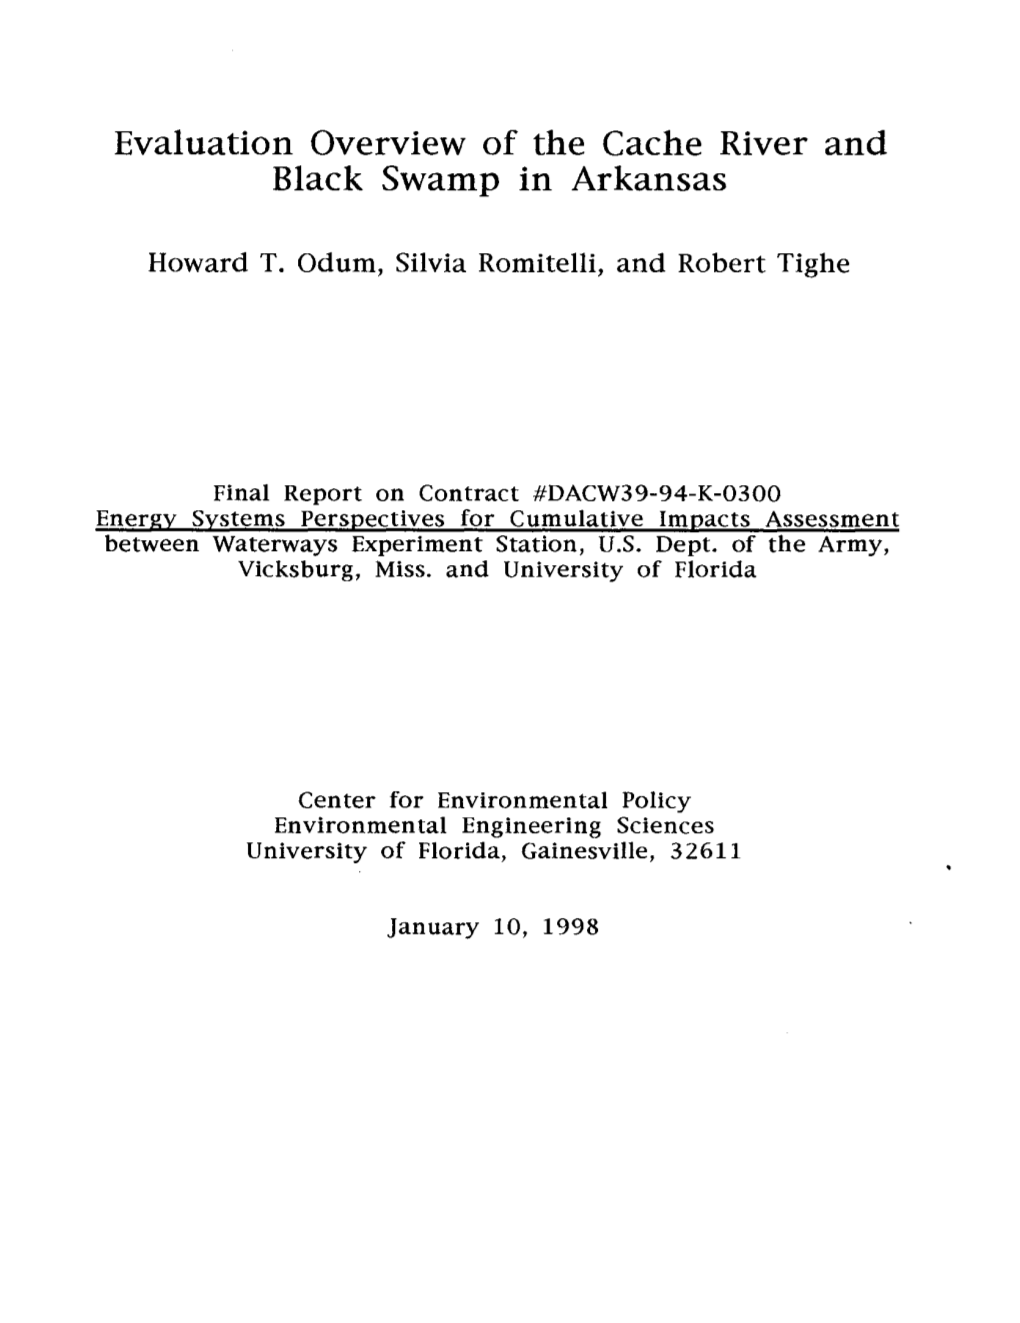 Evaluation Overview of the Cache River and Black Swamp in Arkansas